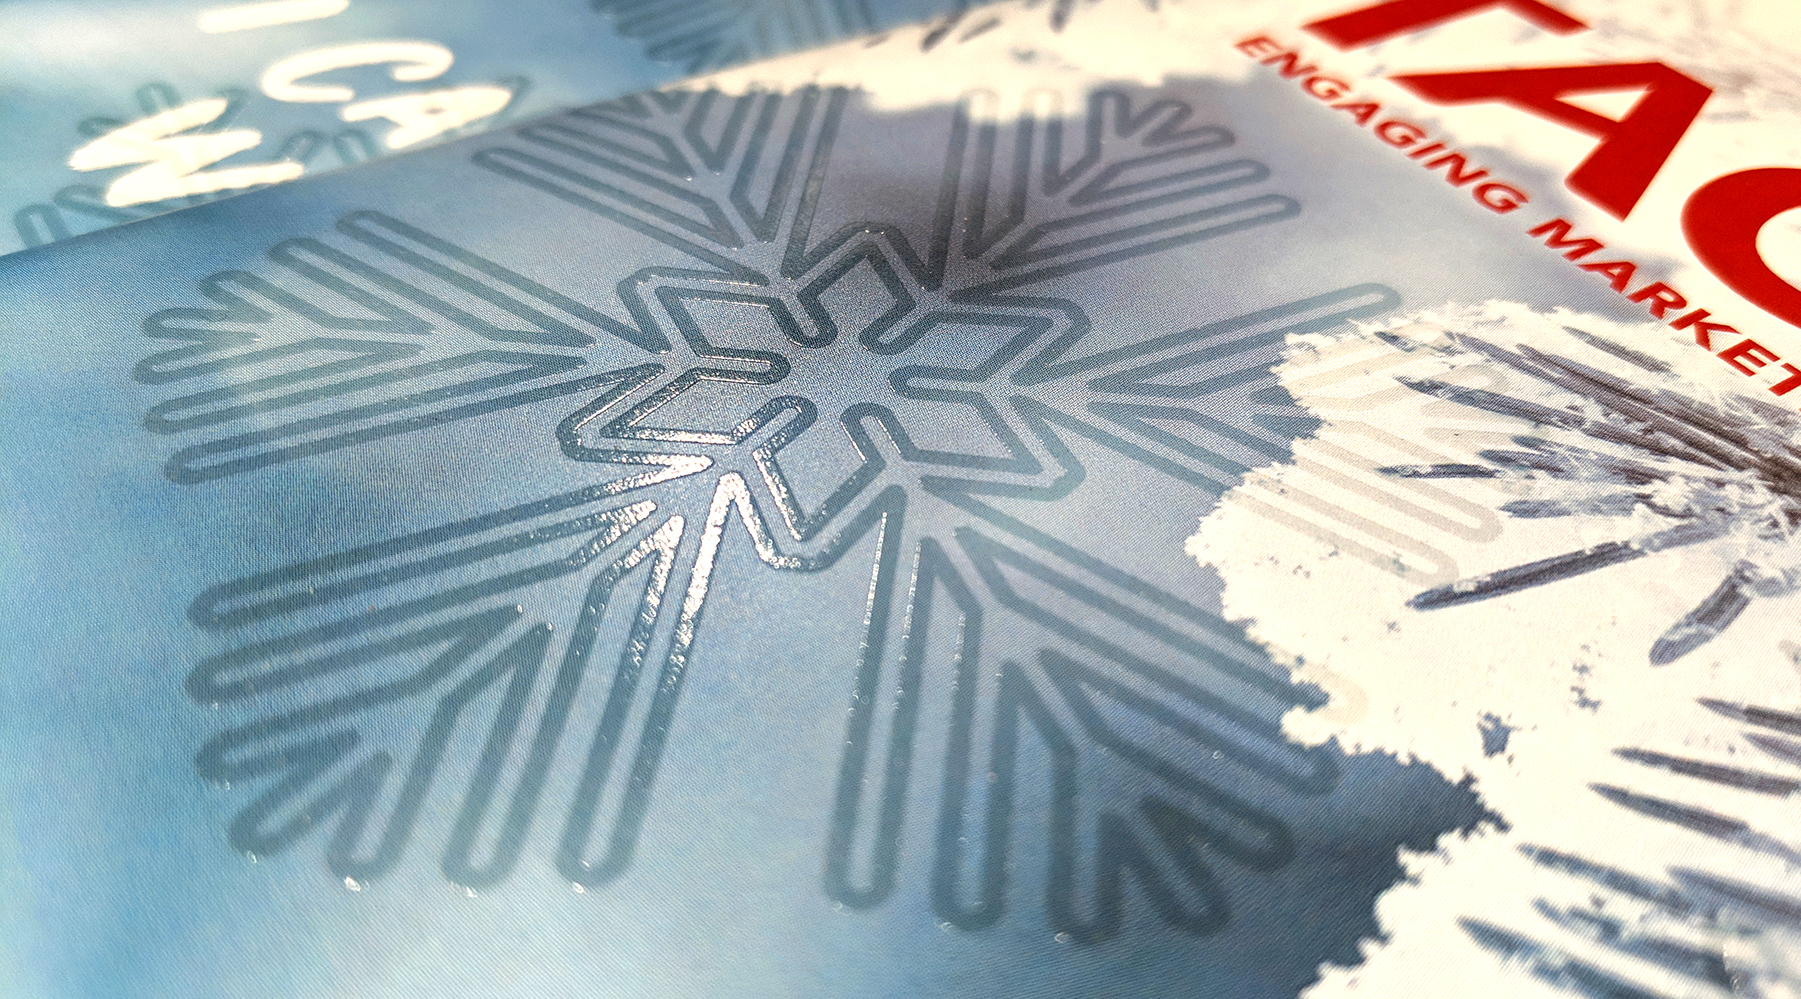 Raised print applied to snowflake on cover of Tactics Magazine